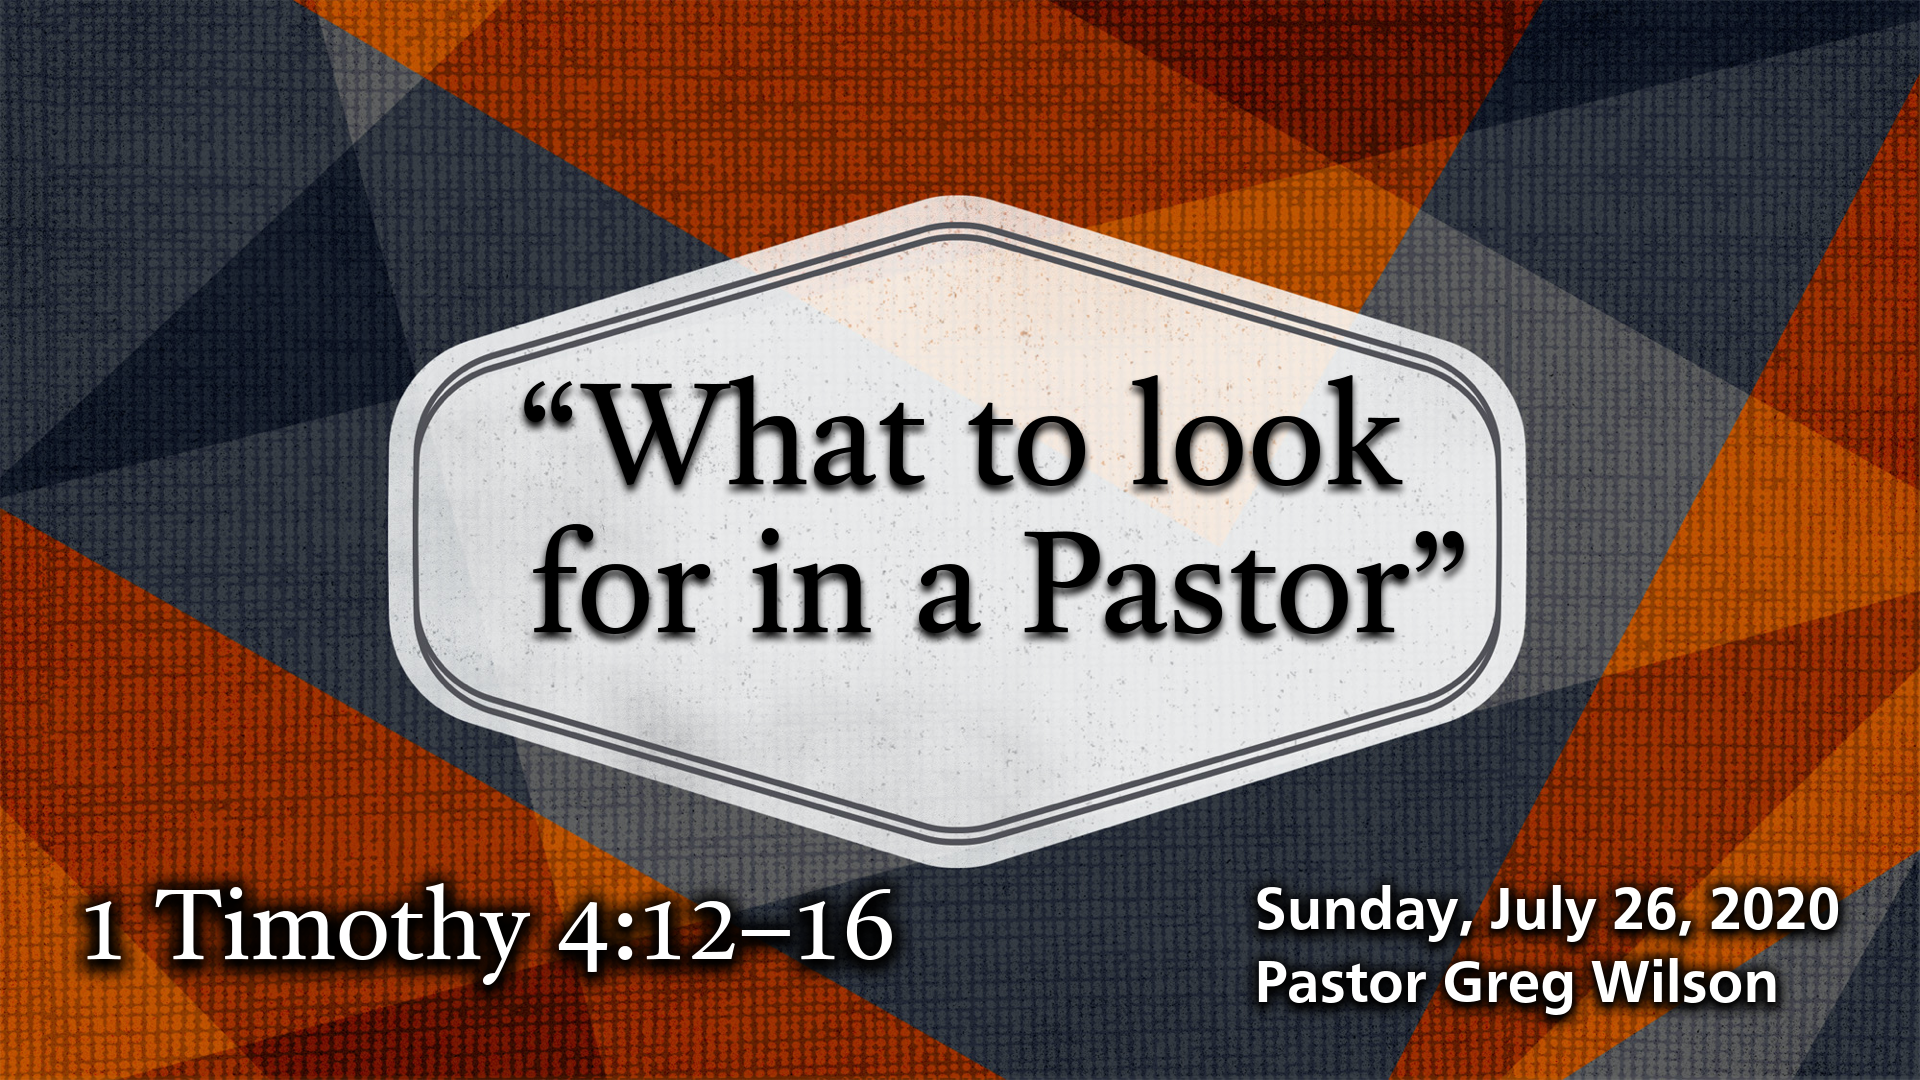 “What to Look For In a Pastor”